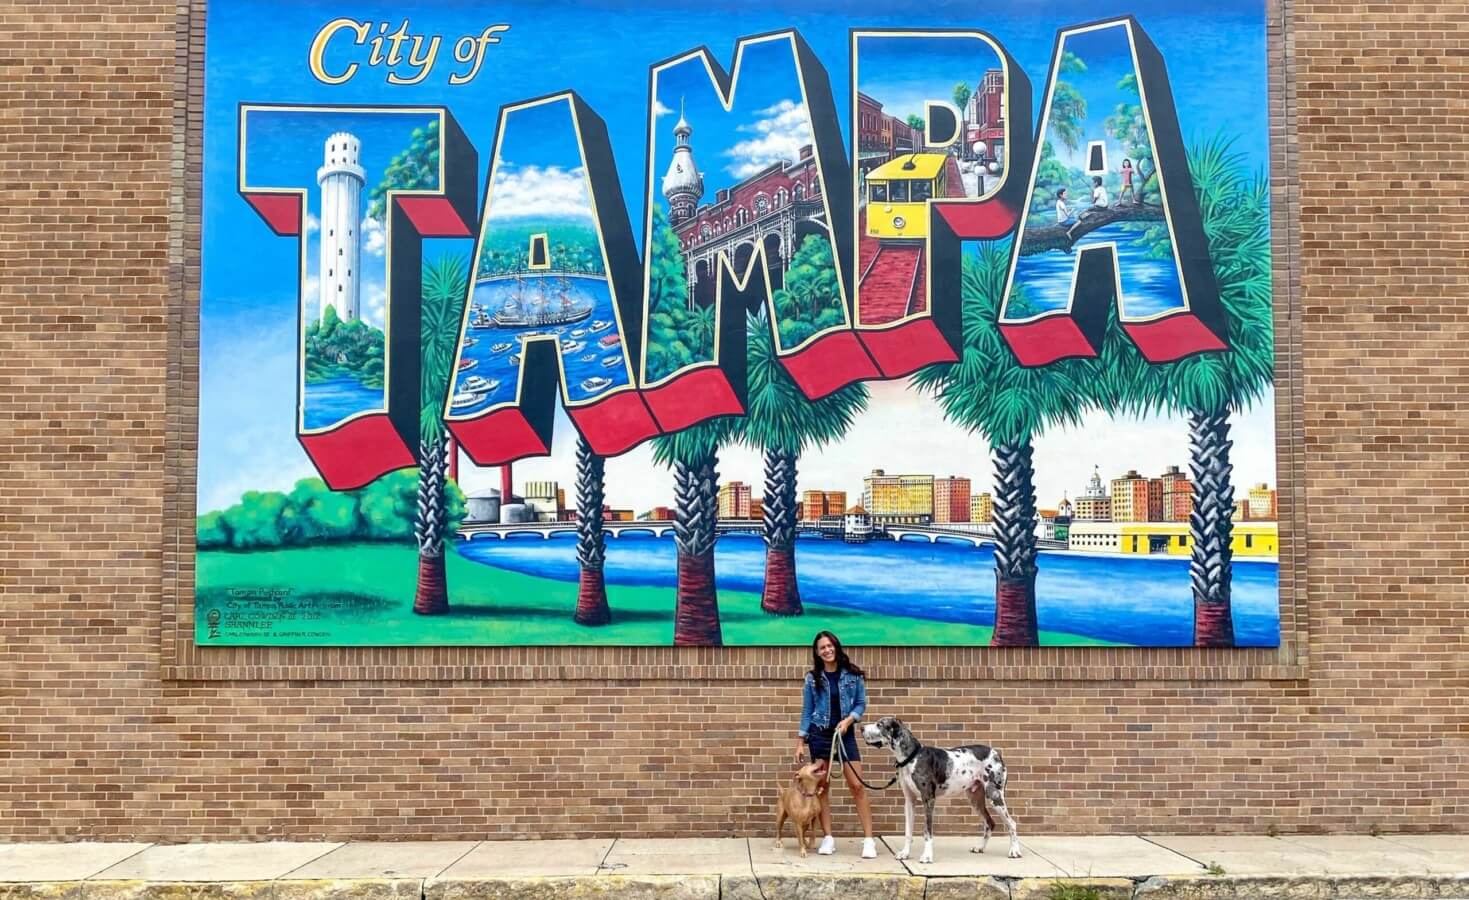 A woman and her two dogs stand in front of a City of Tampa mural